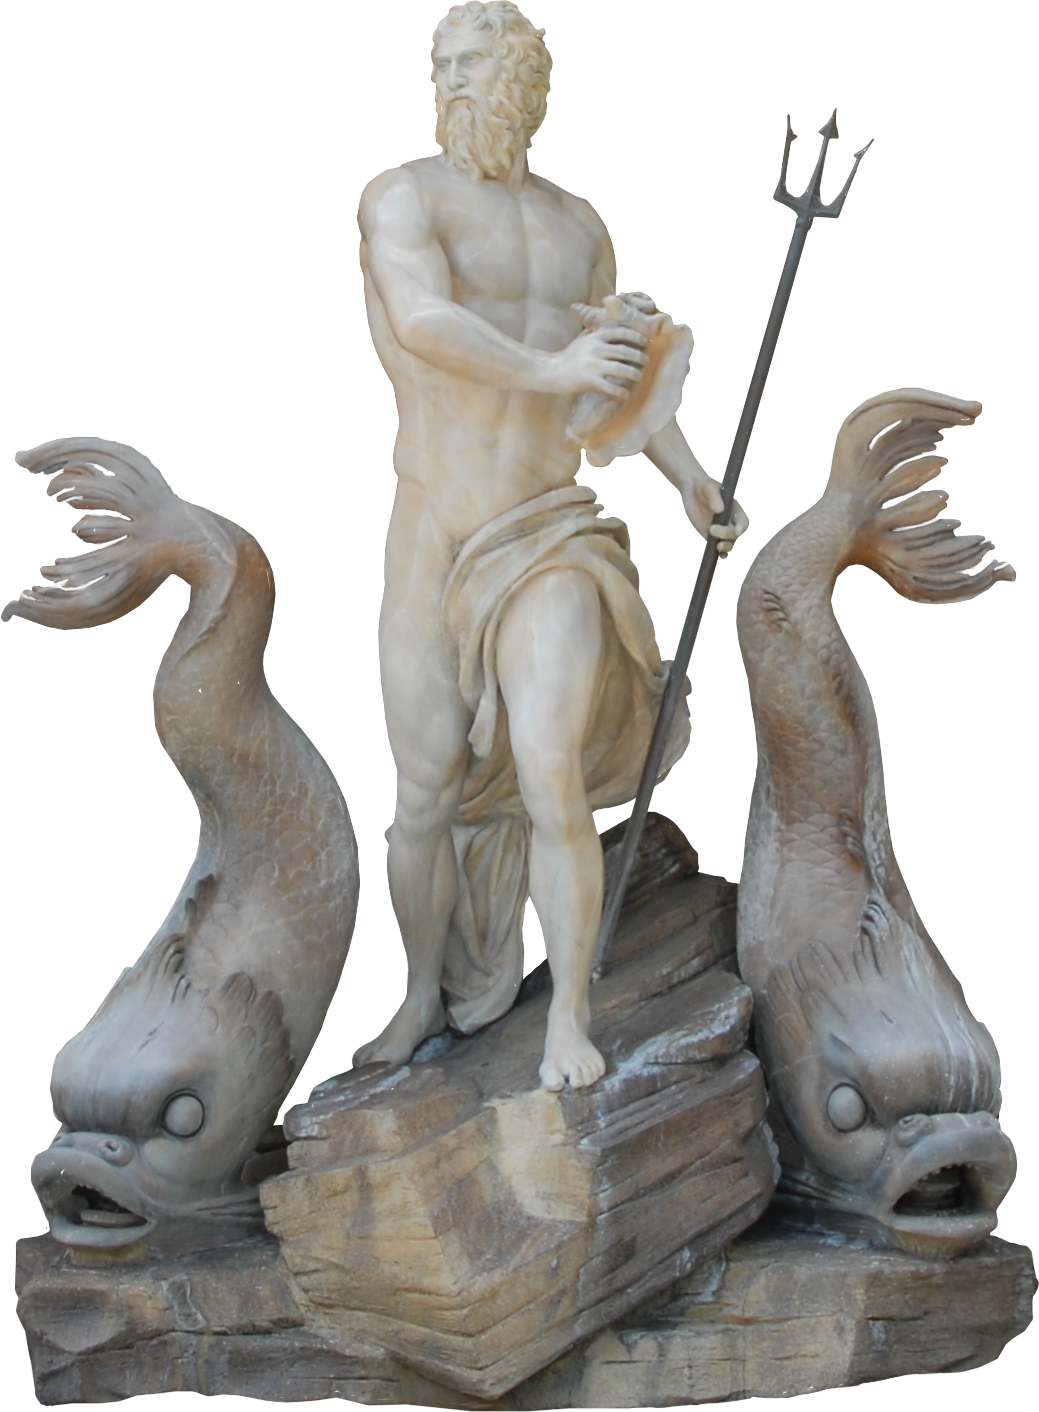 A Statue Of A Man Holding A Trident And Two Fish